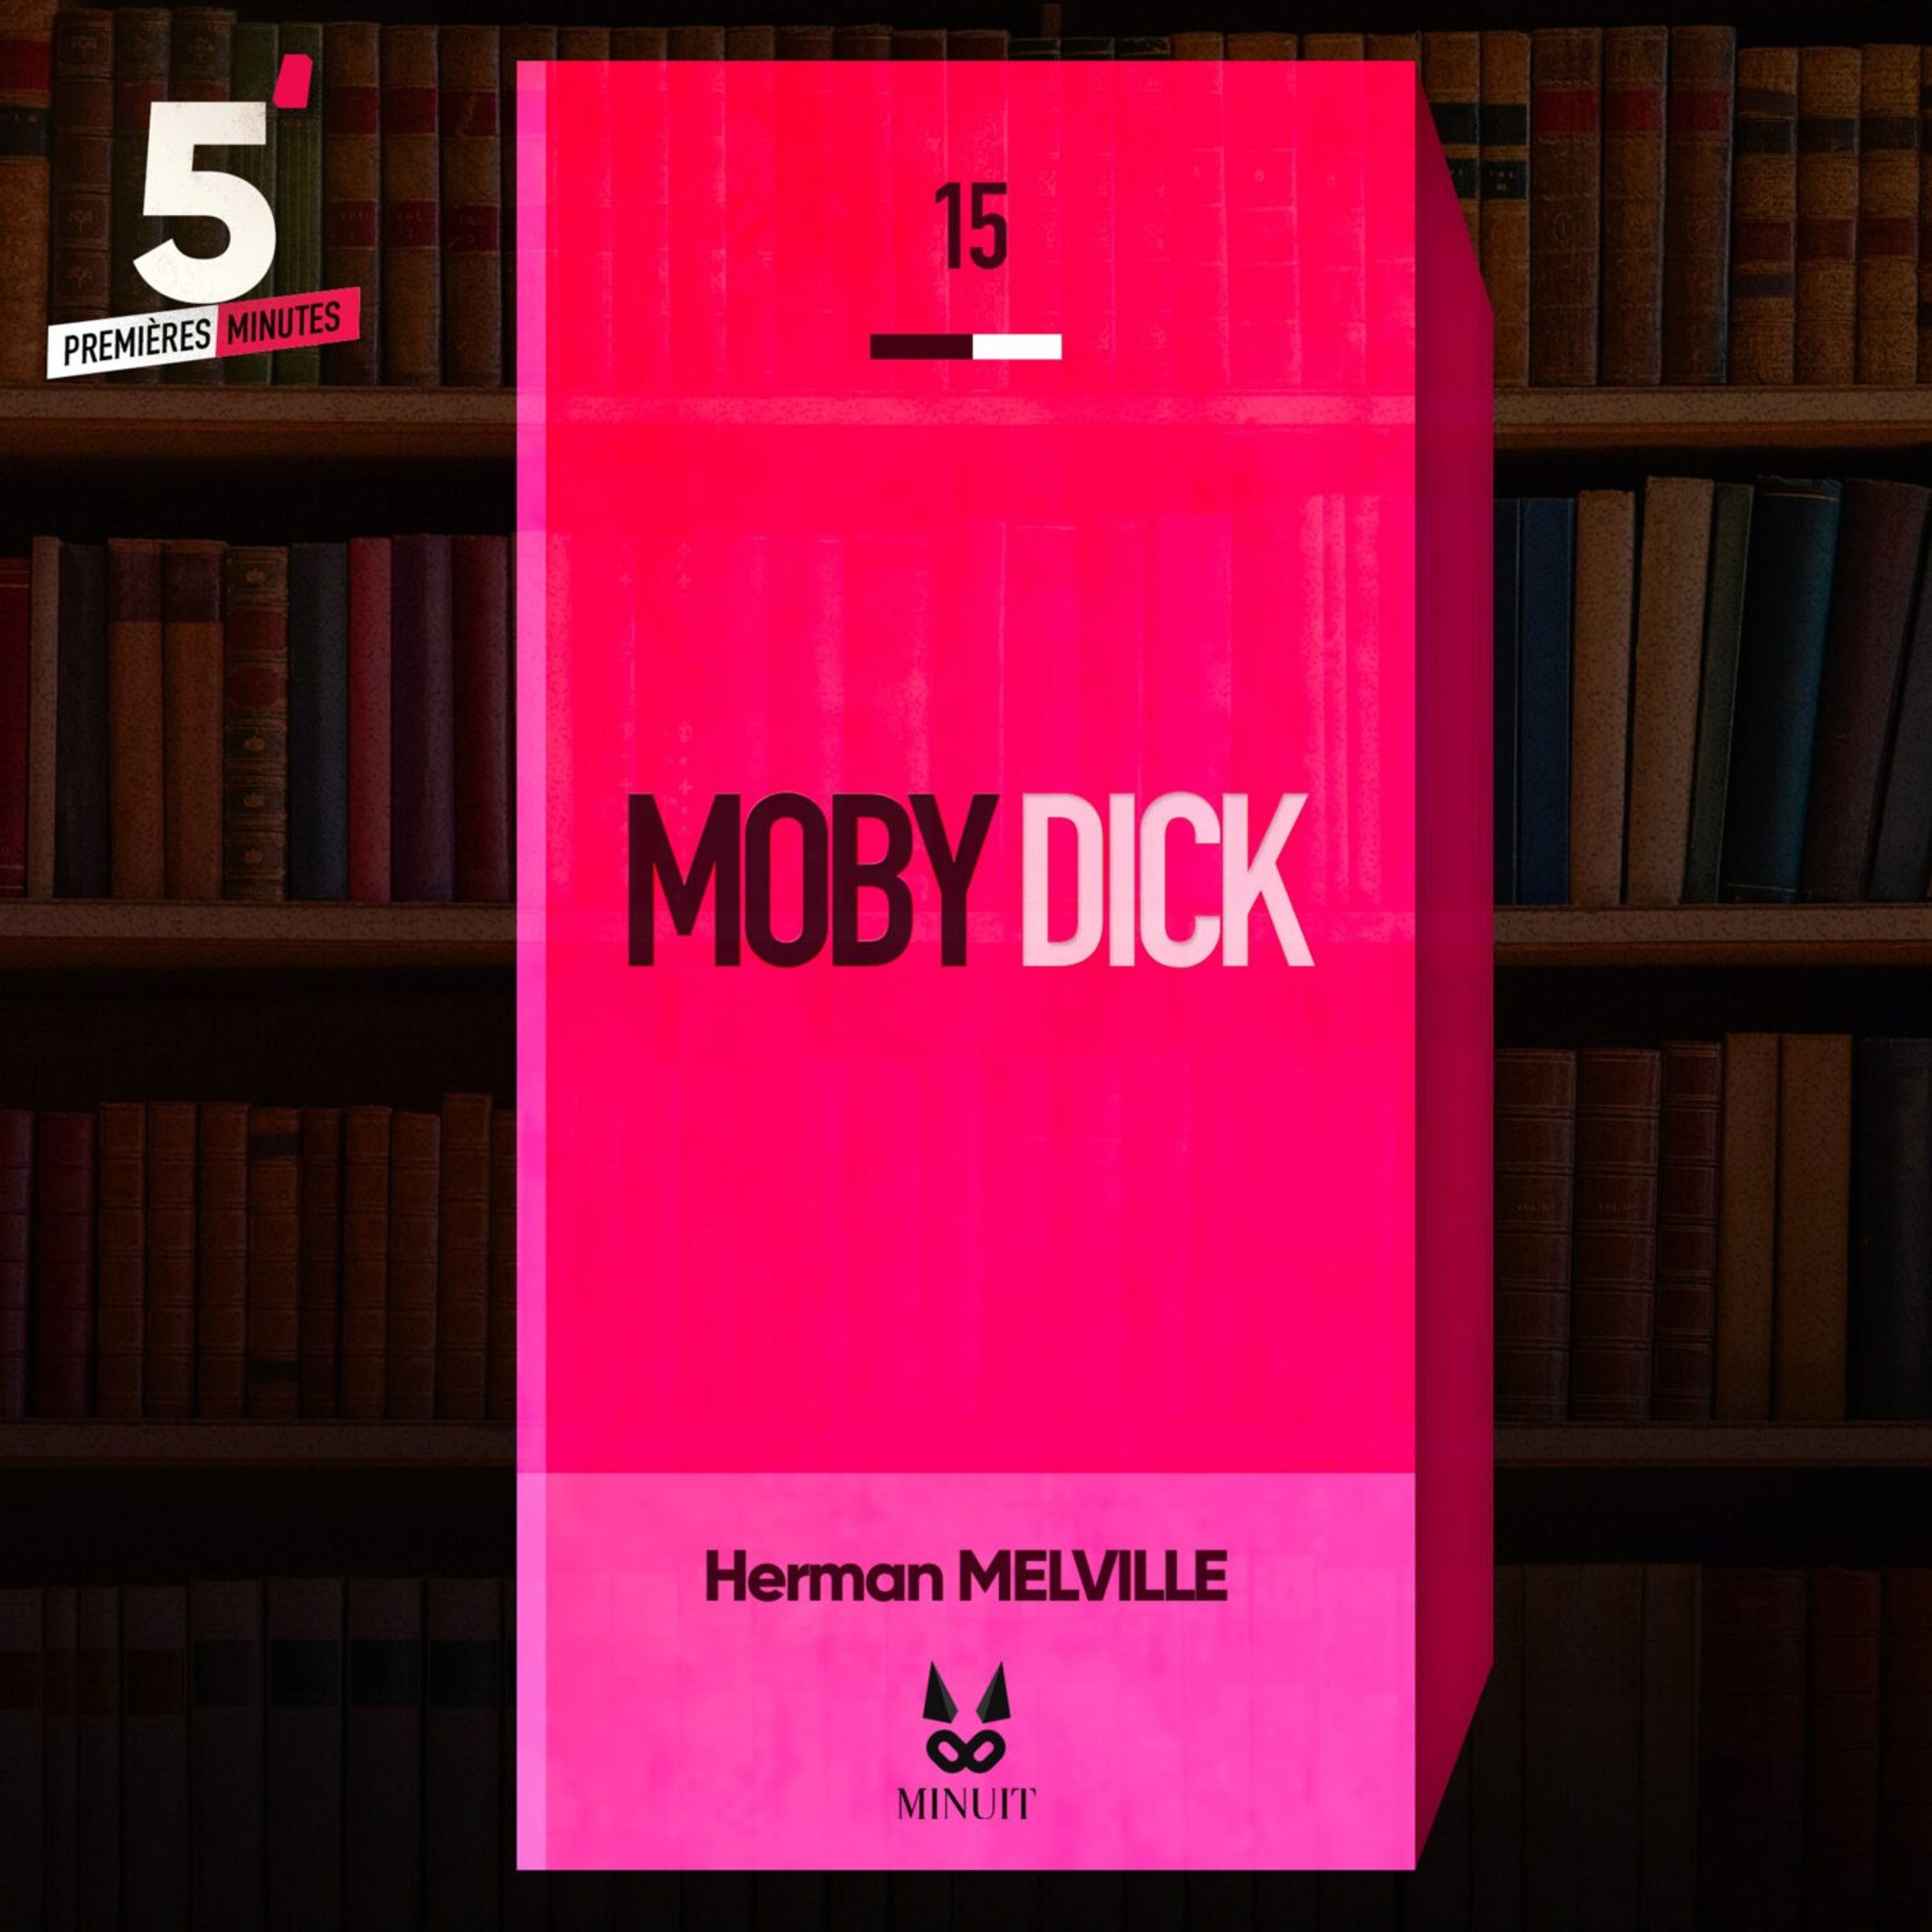 "Moby Dick" • Herman MELVILLE